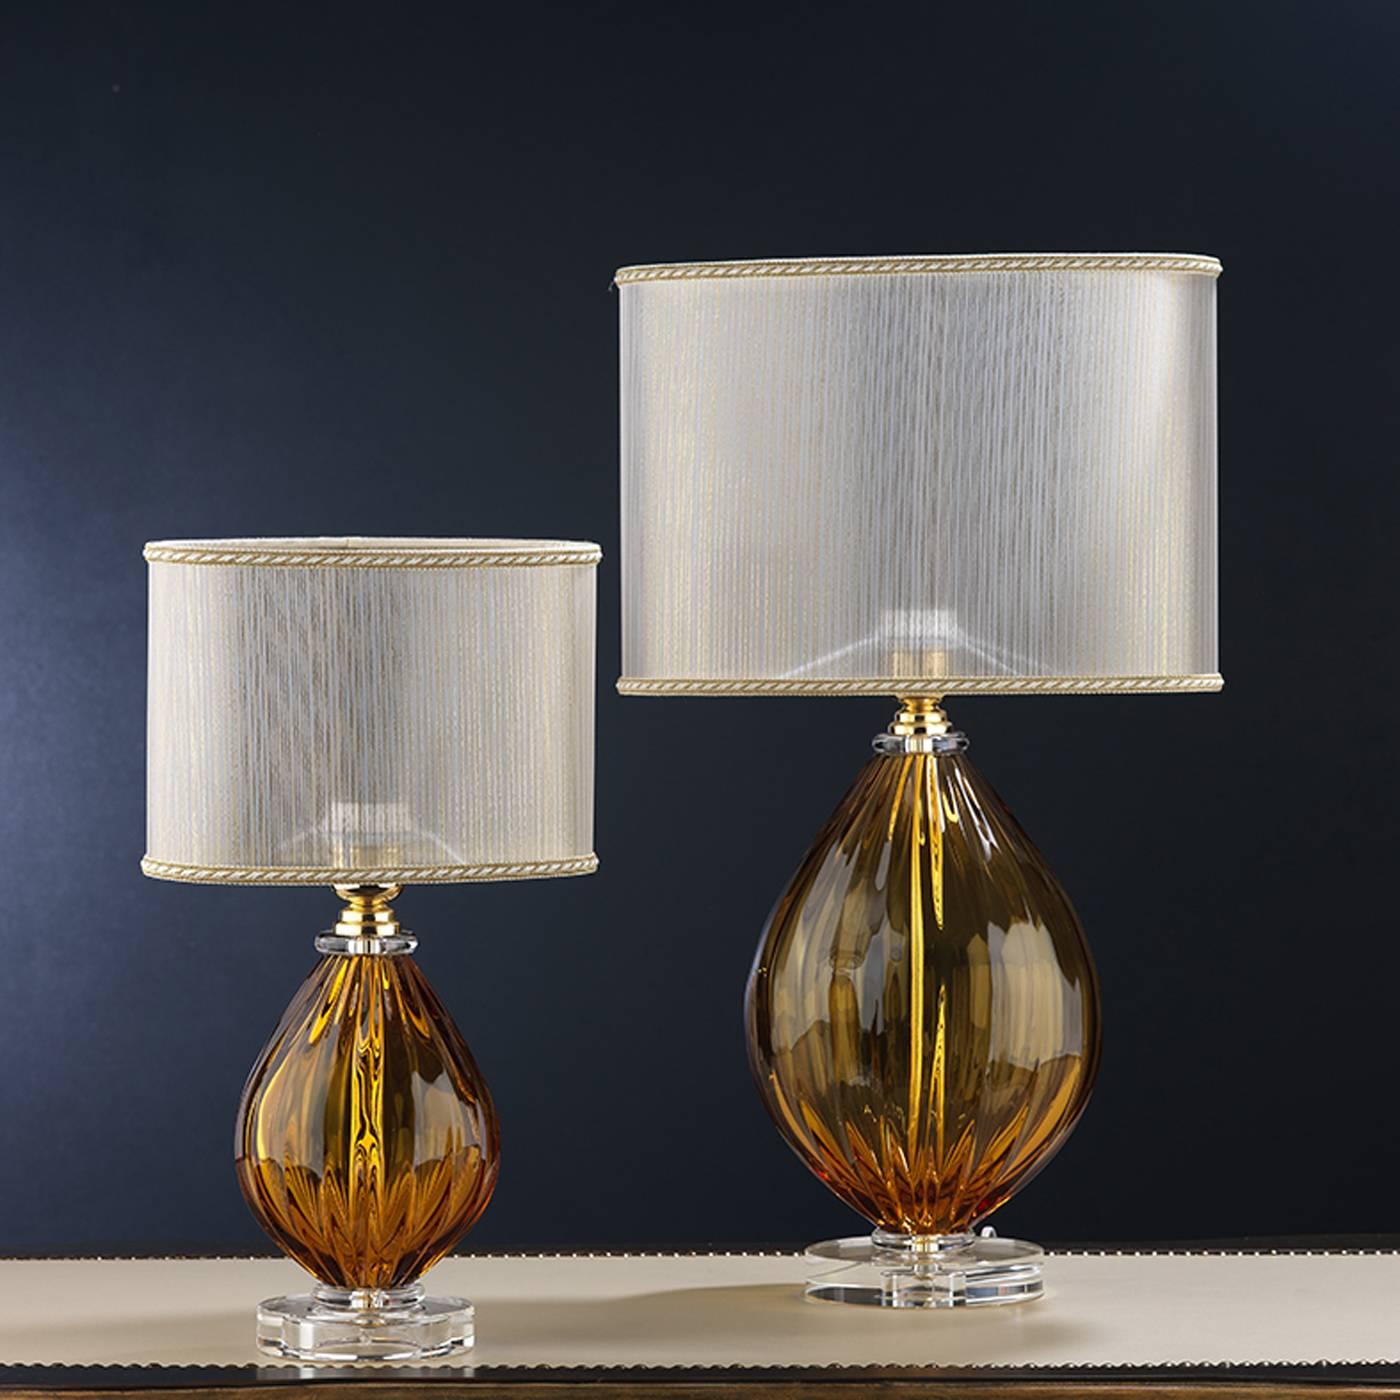 This elegant lamp was designed to sit on a bedside table. Its body is crafted in mouth-blown crystal in a rich amber coloration, with a clear base. The transparent lampshade harmoniously complements the body.